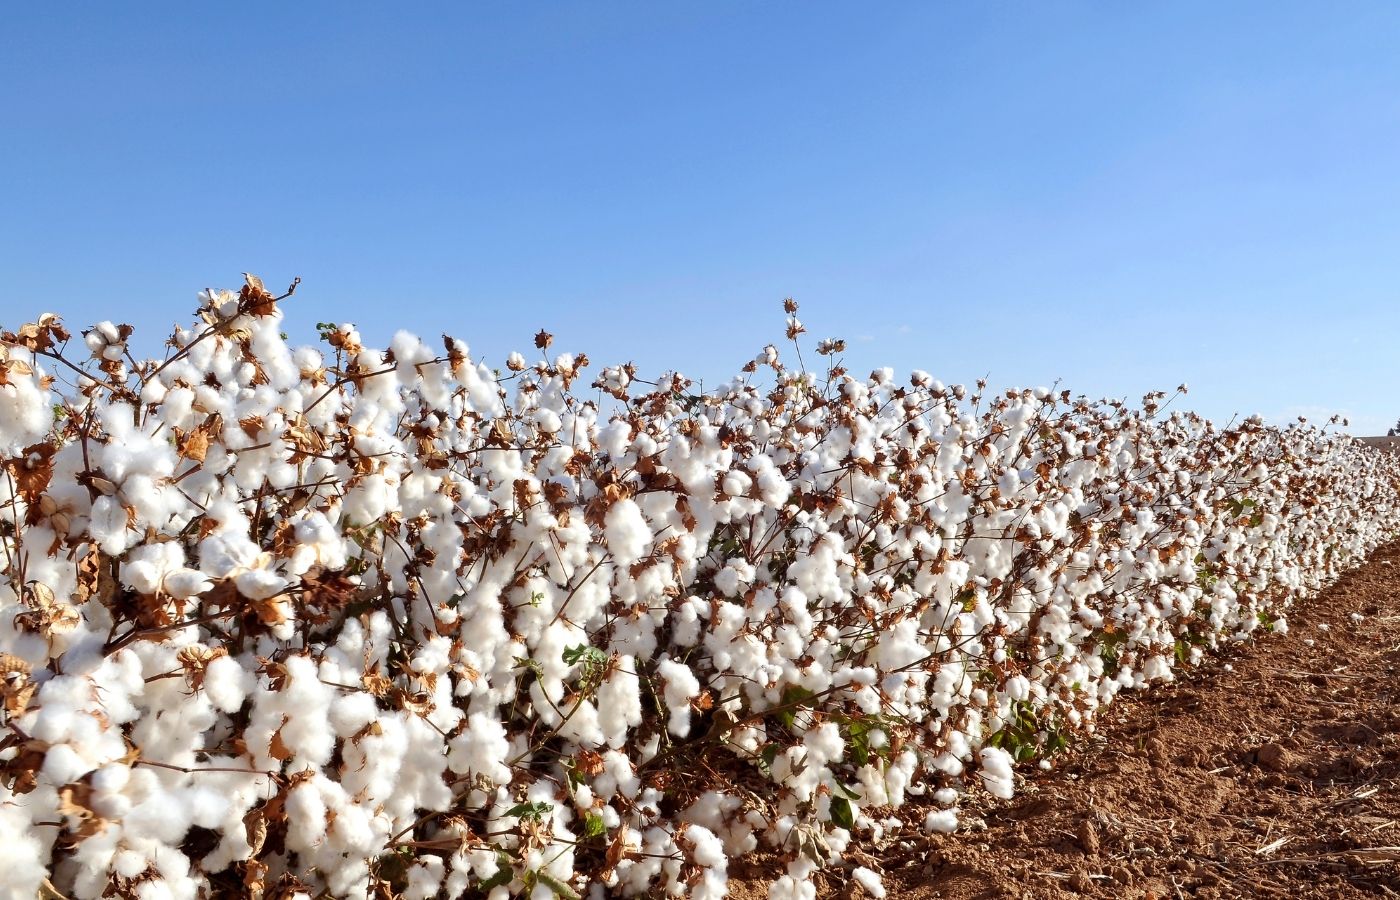 What is the real difference between organic cotton and regular? - Cariki